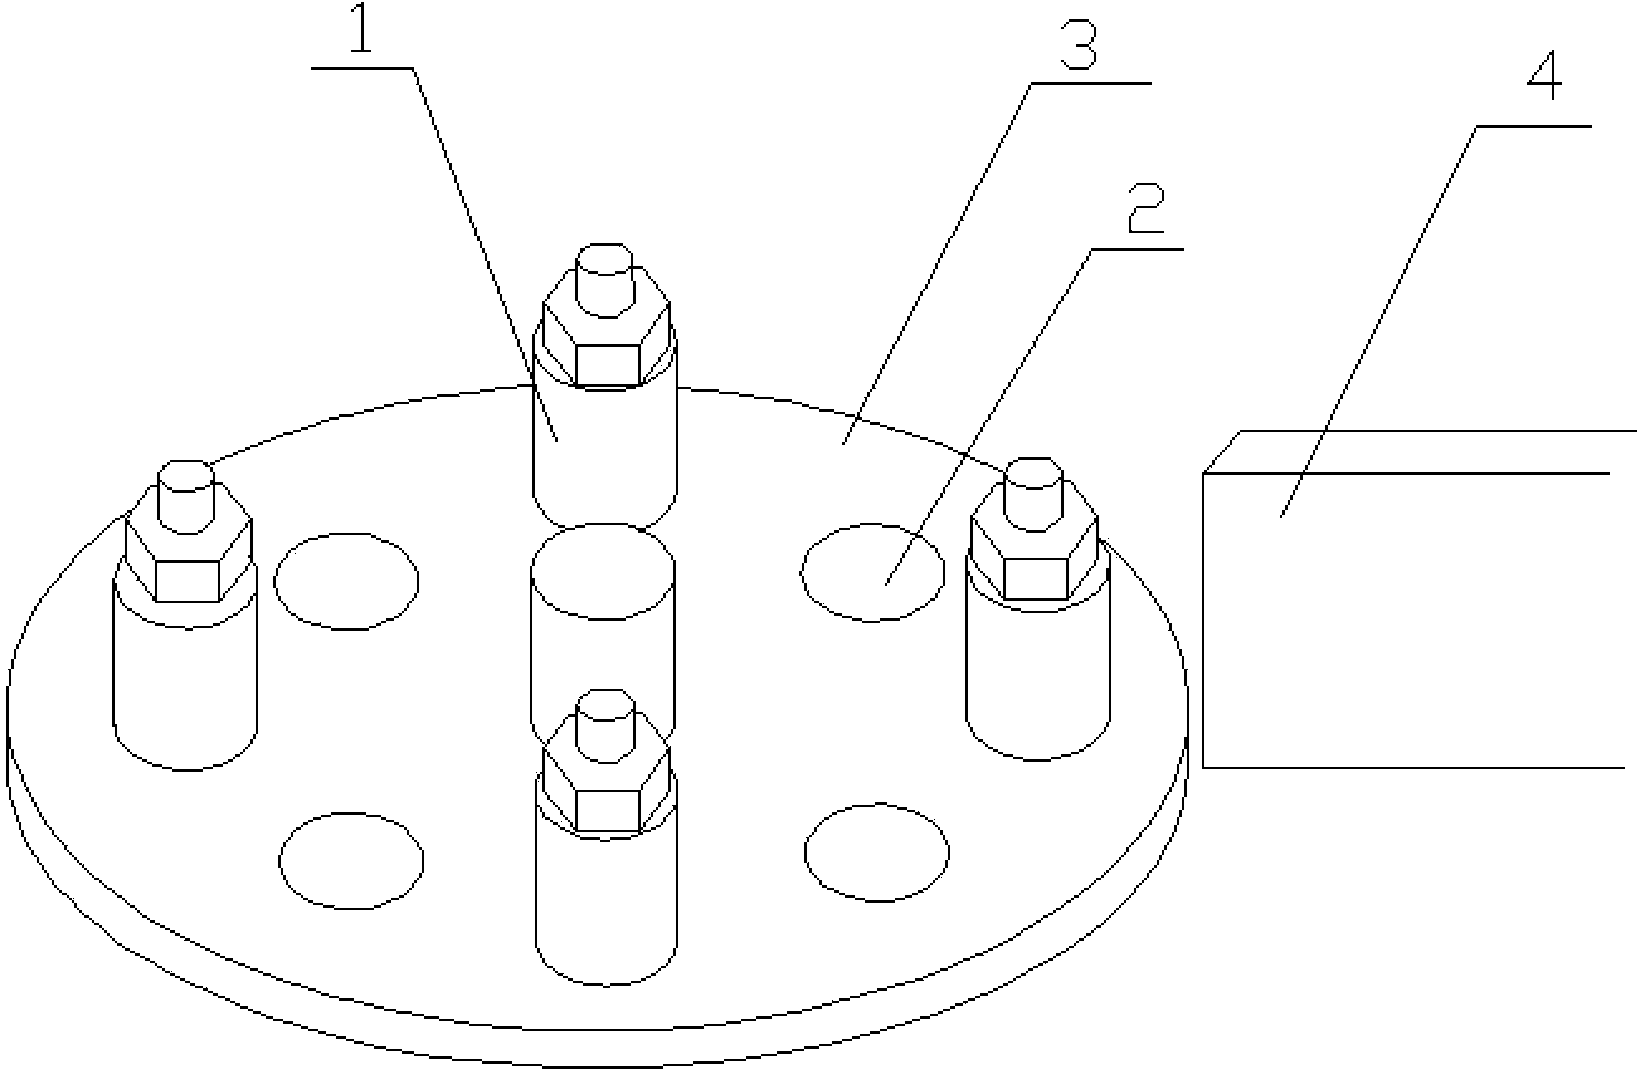 Nut processing device